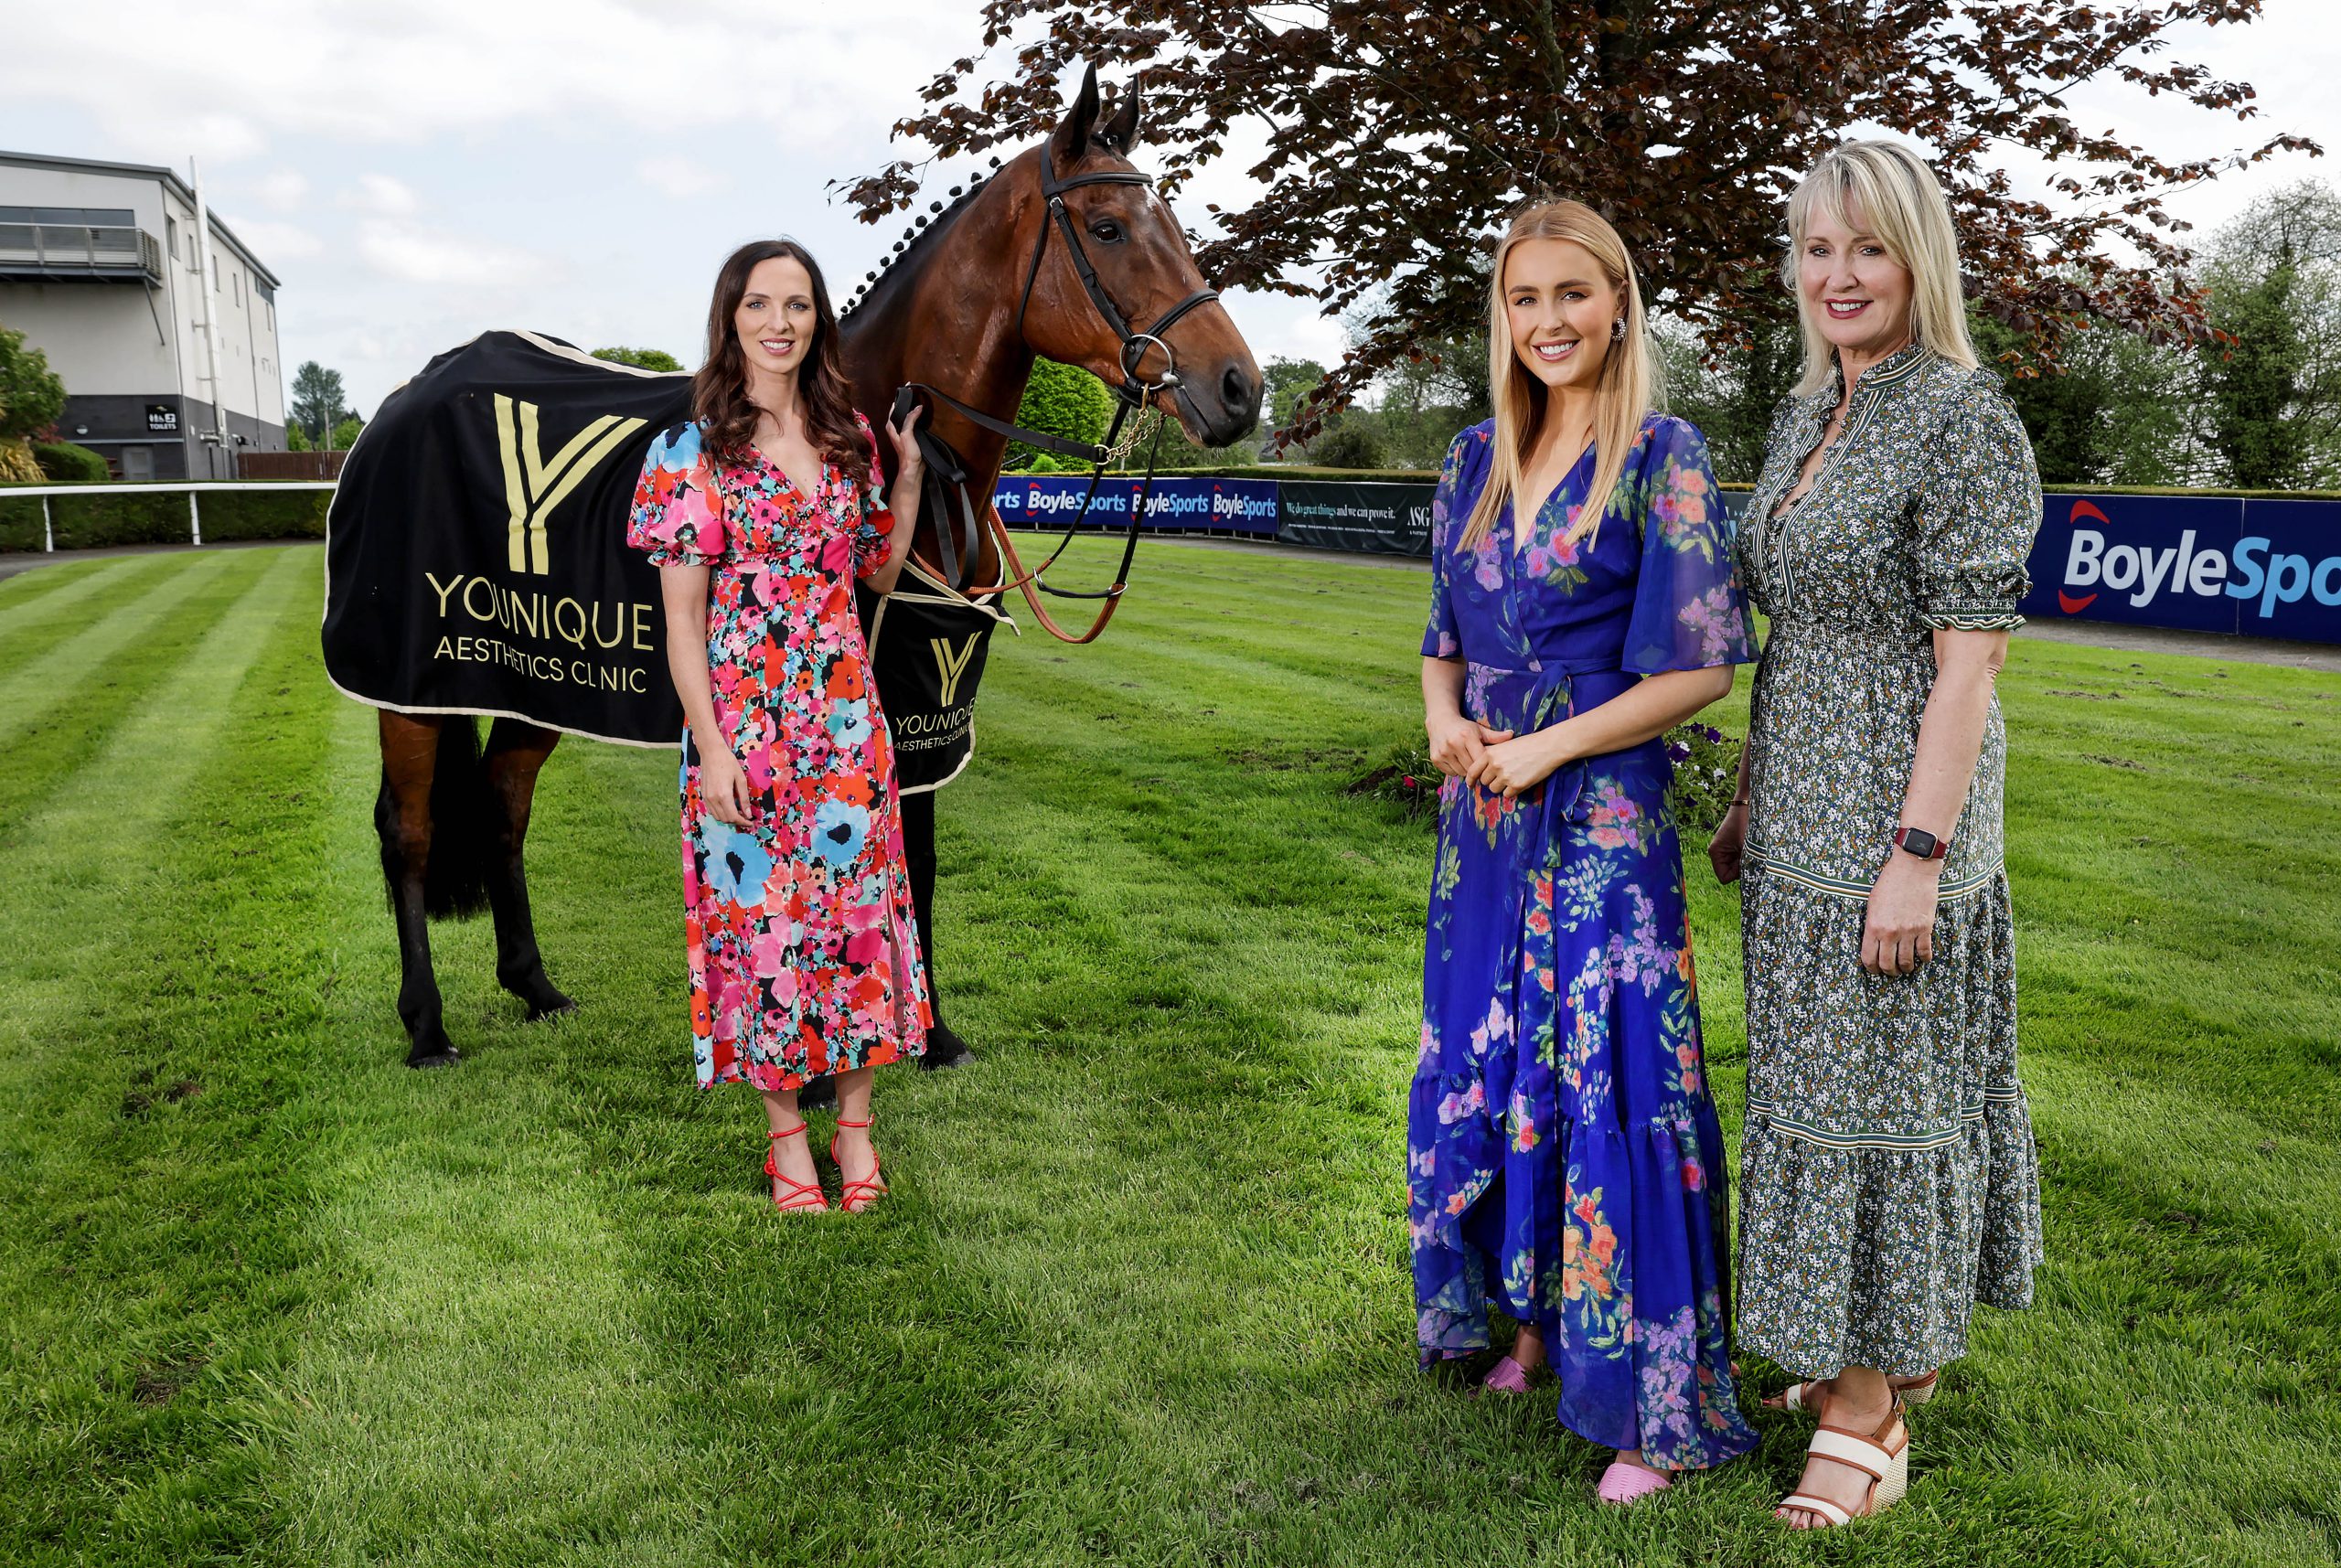 Younique Aesthetics announced as sponsor of Best Dressed at Down Royal Summer Festival of Racing